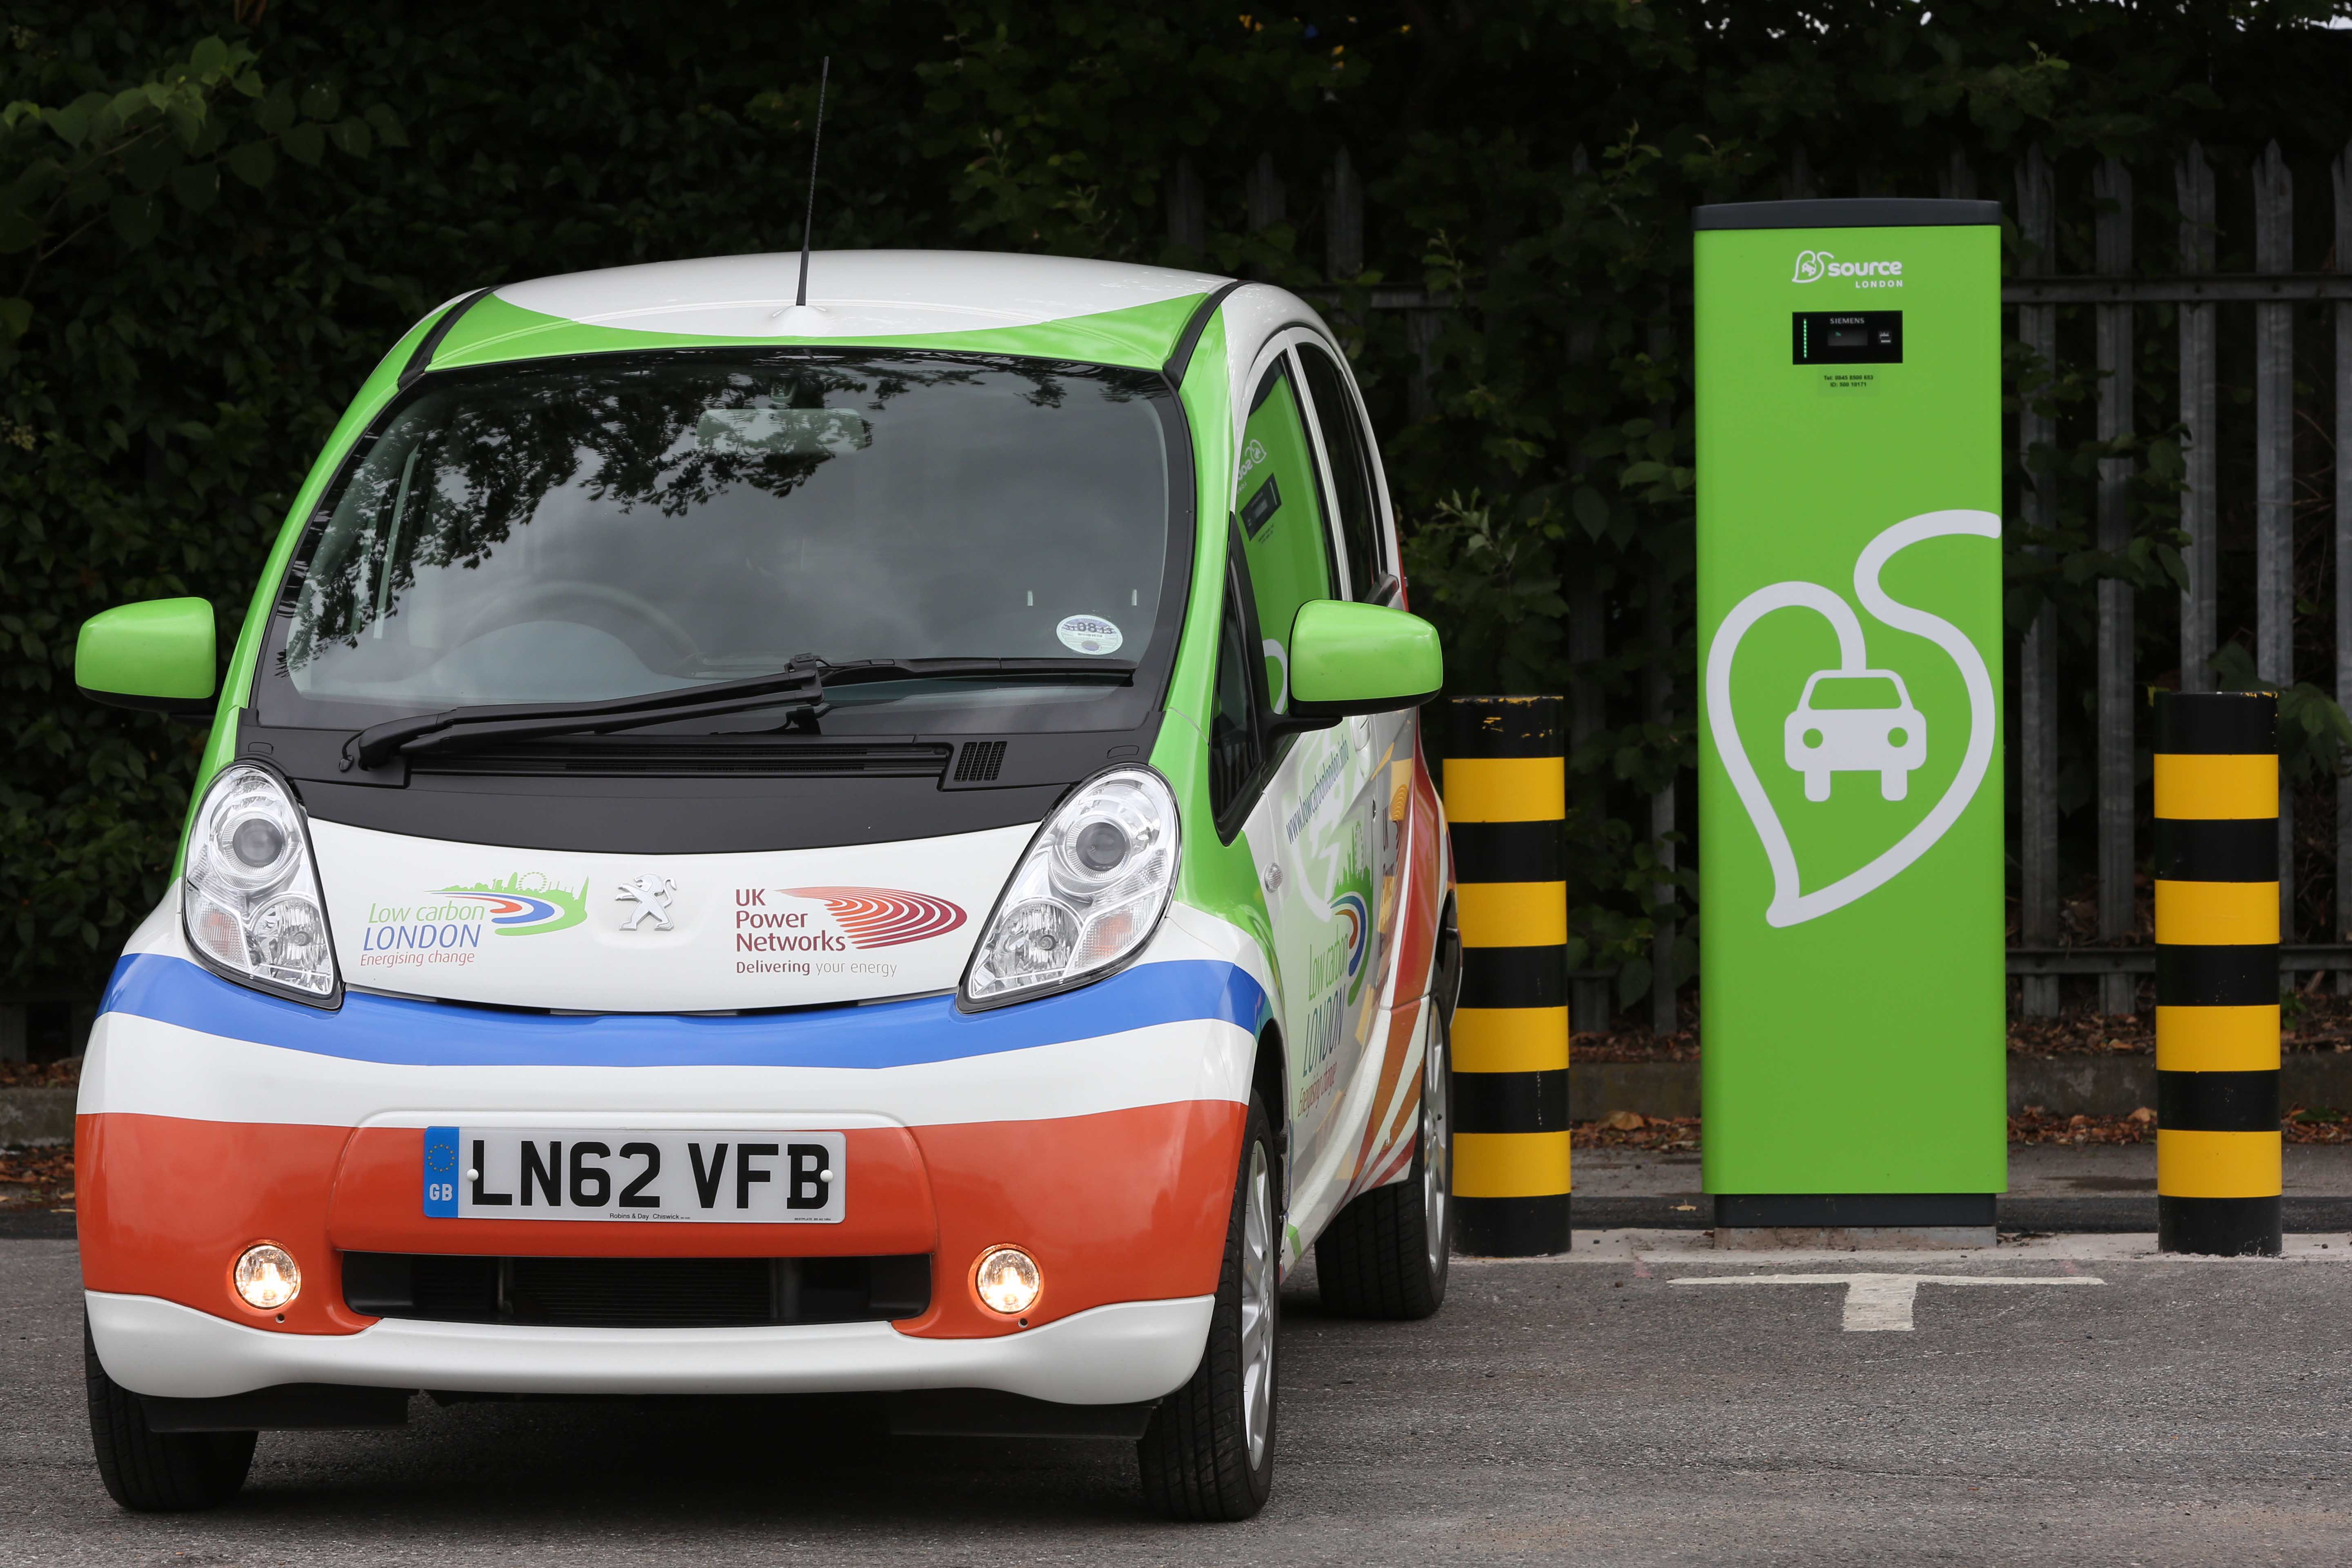 New EV charging points opened in London Air Quality News